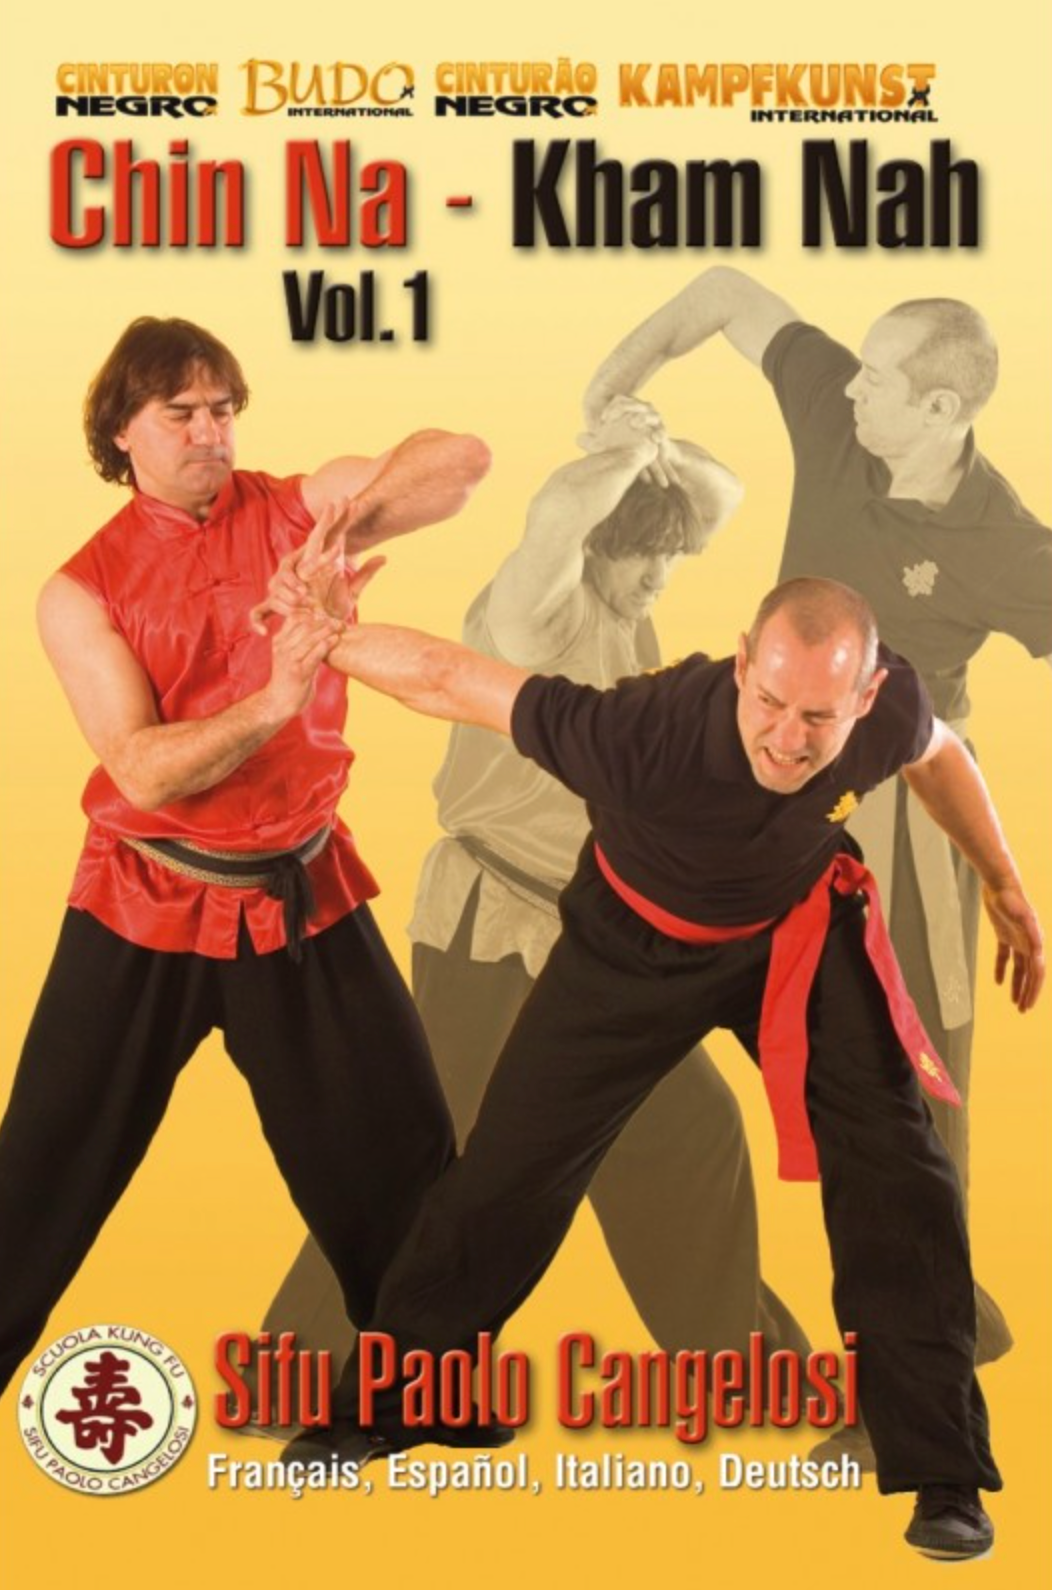 Chin Na: Kham Nah Vol 1 DVD with Paolo Cangelosi - Budovideos Inc